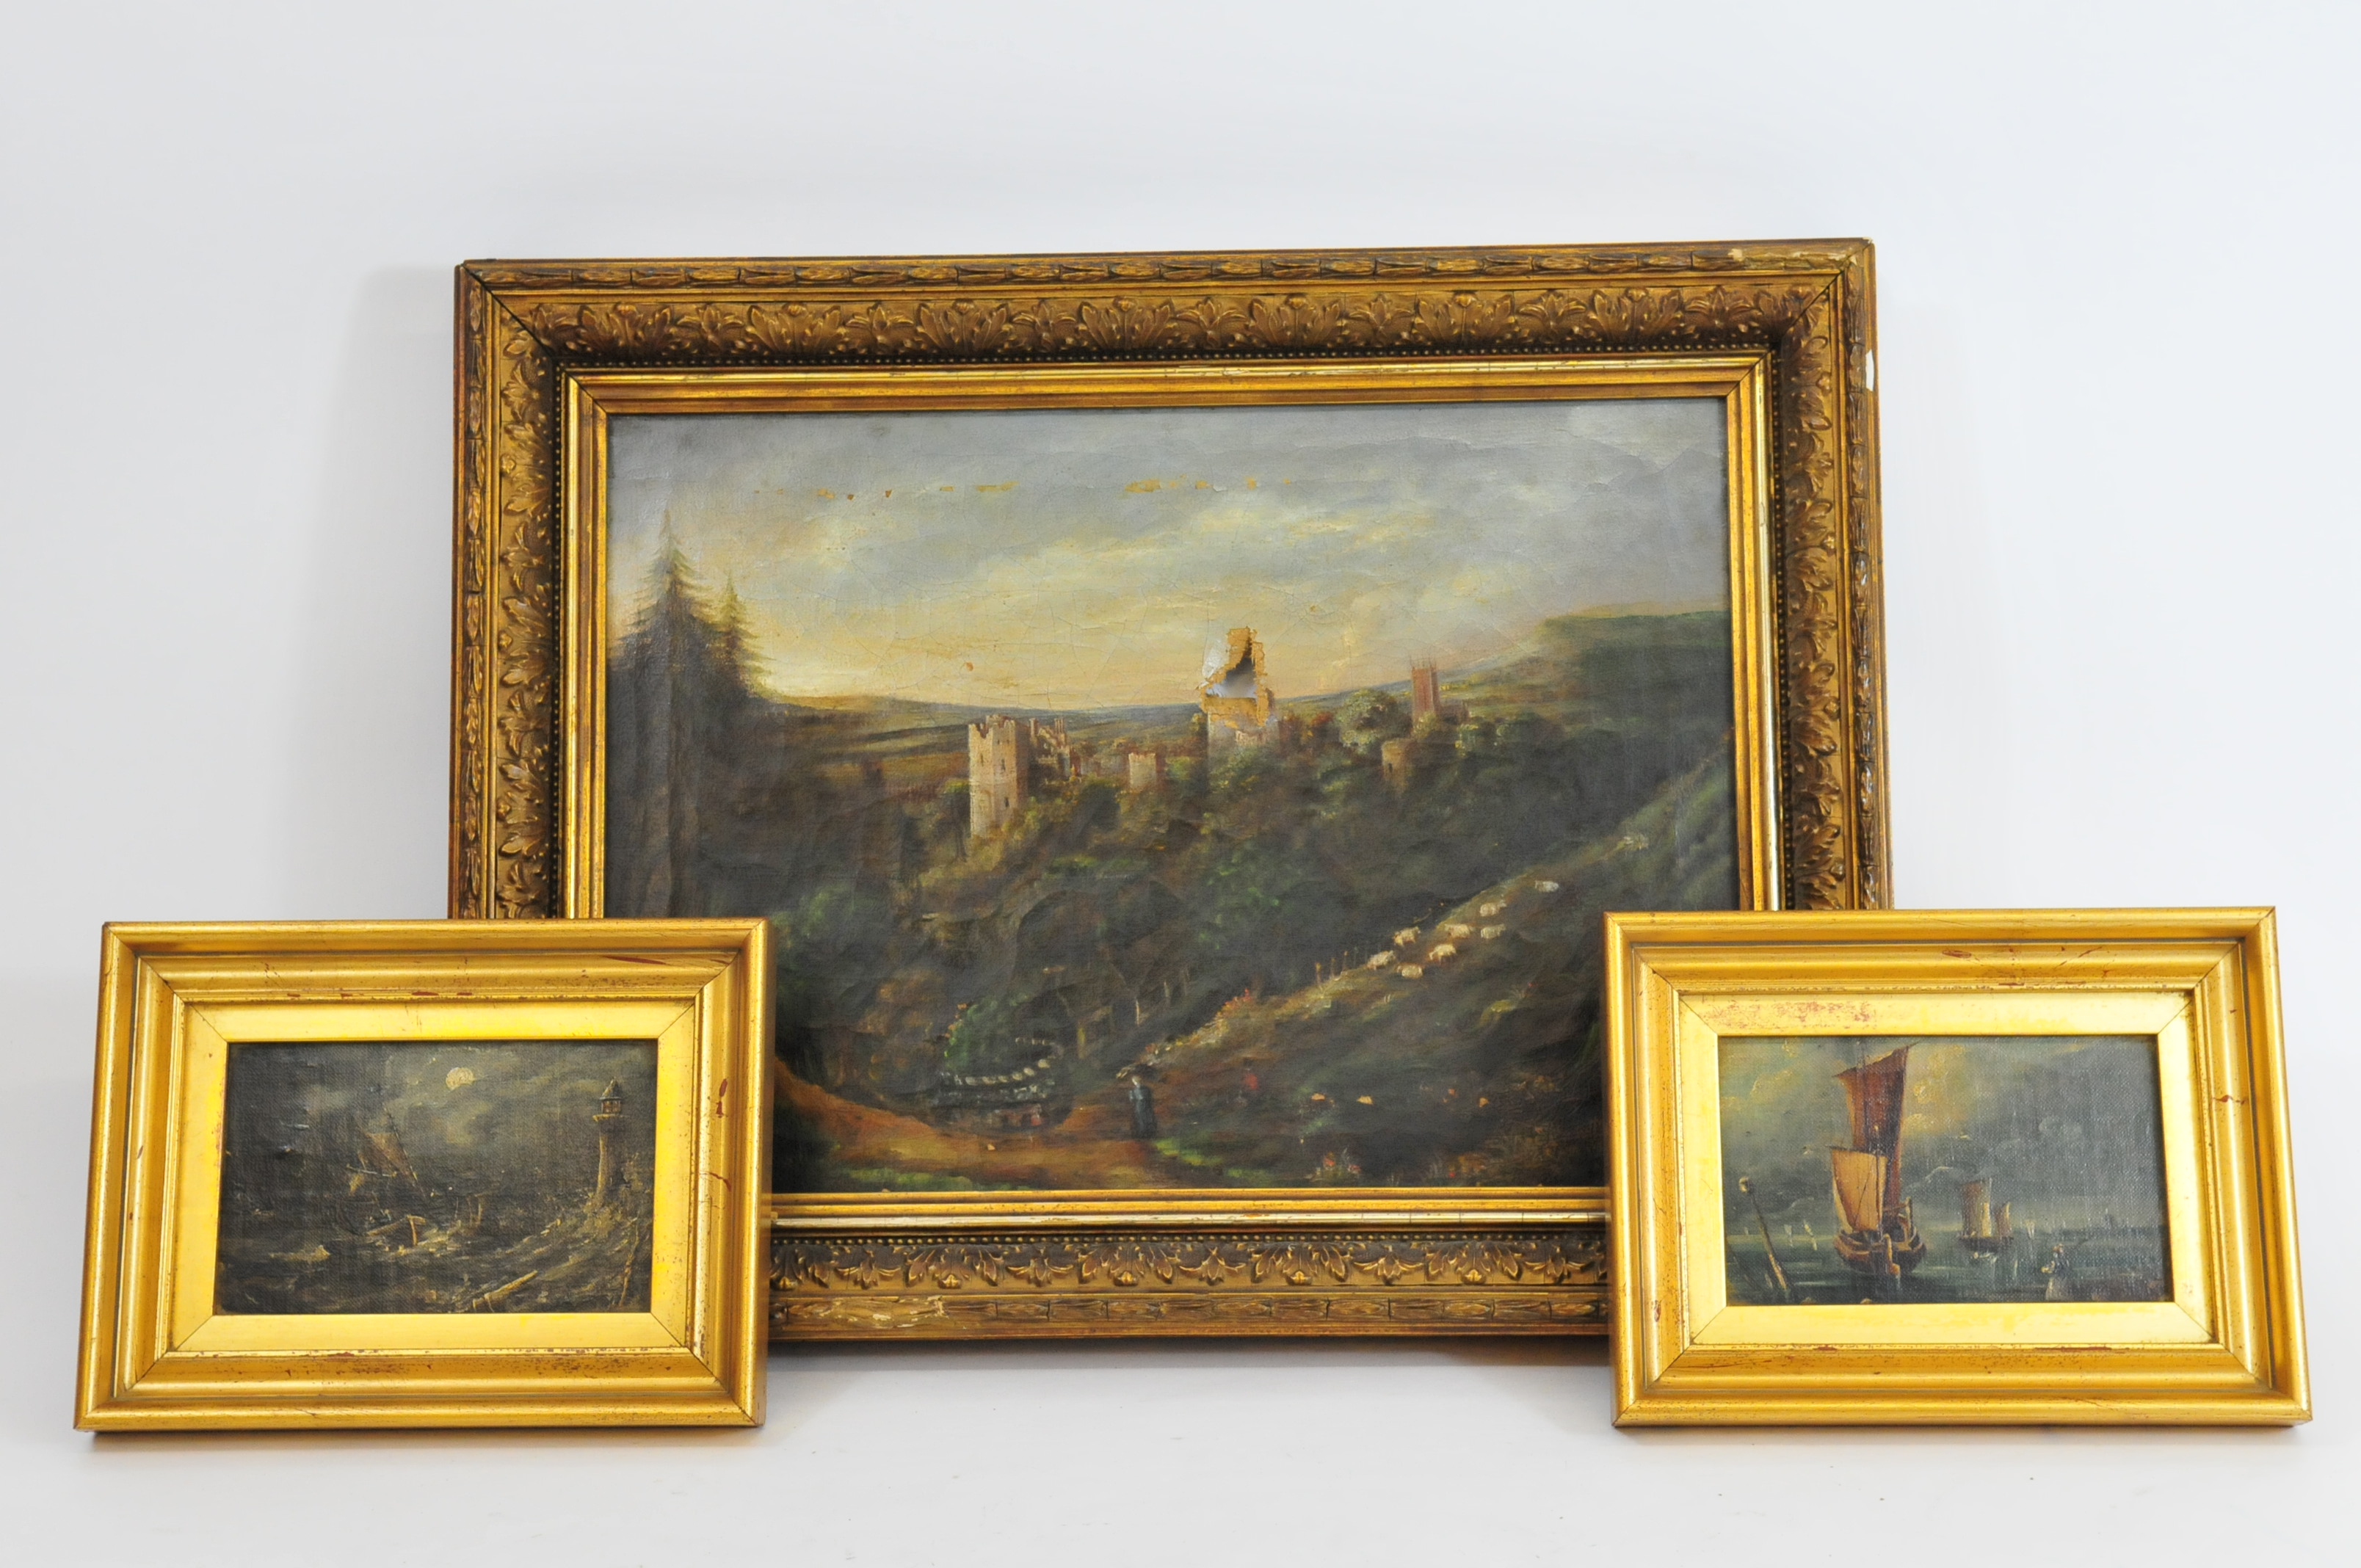 A framed oil on canvas showing castle set amongst rural scene, probably 19th century, with two small